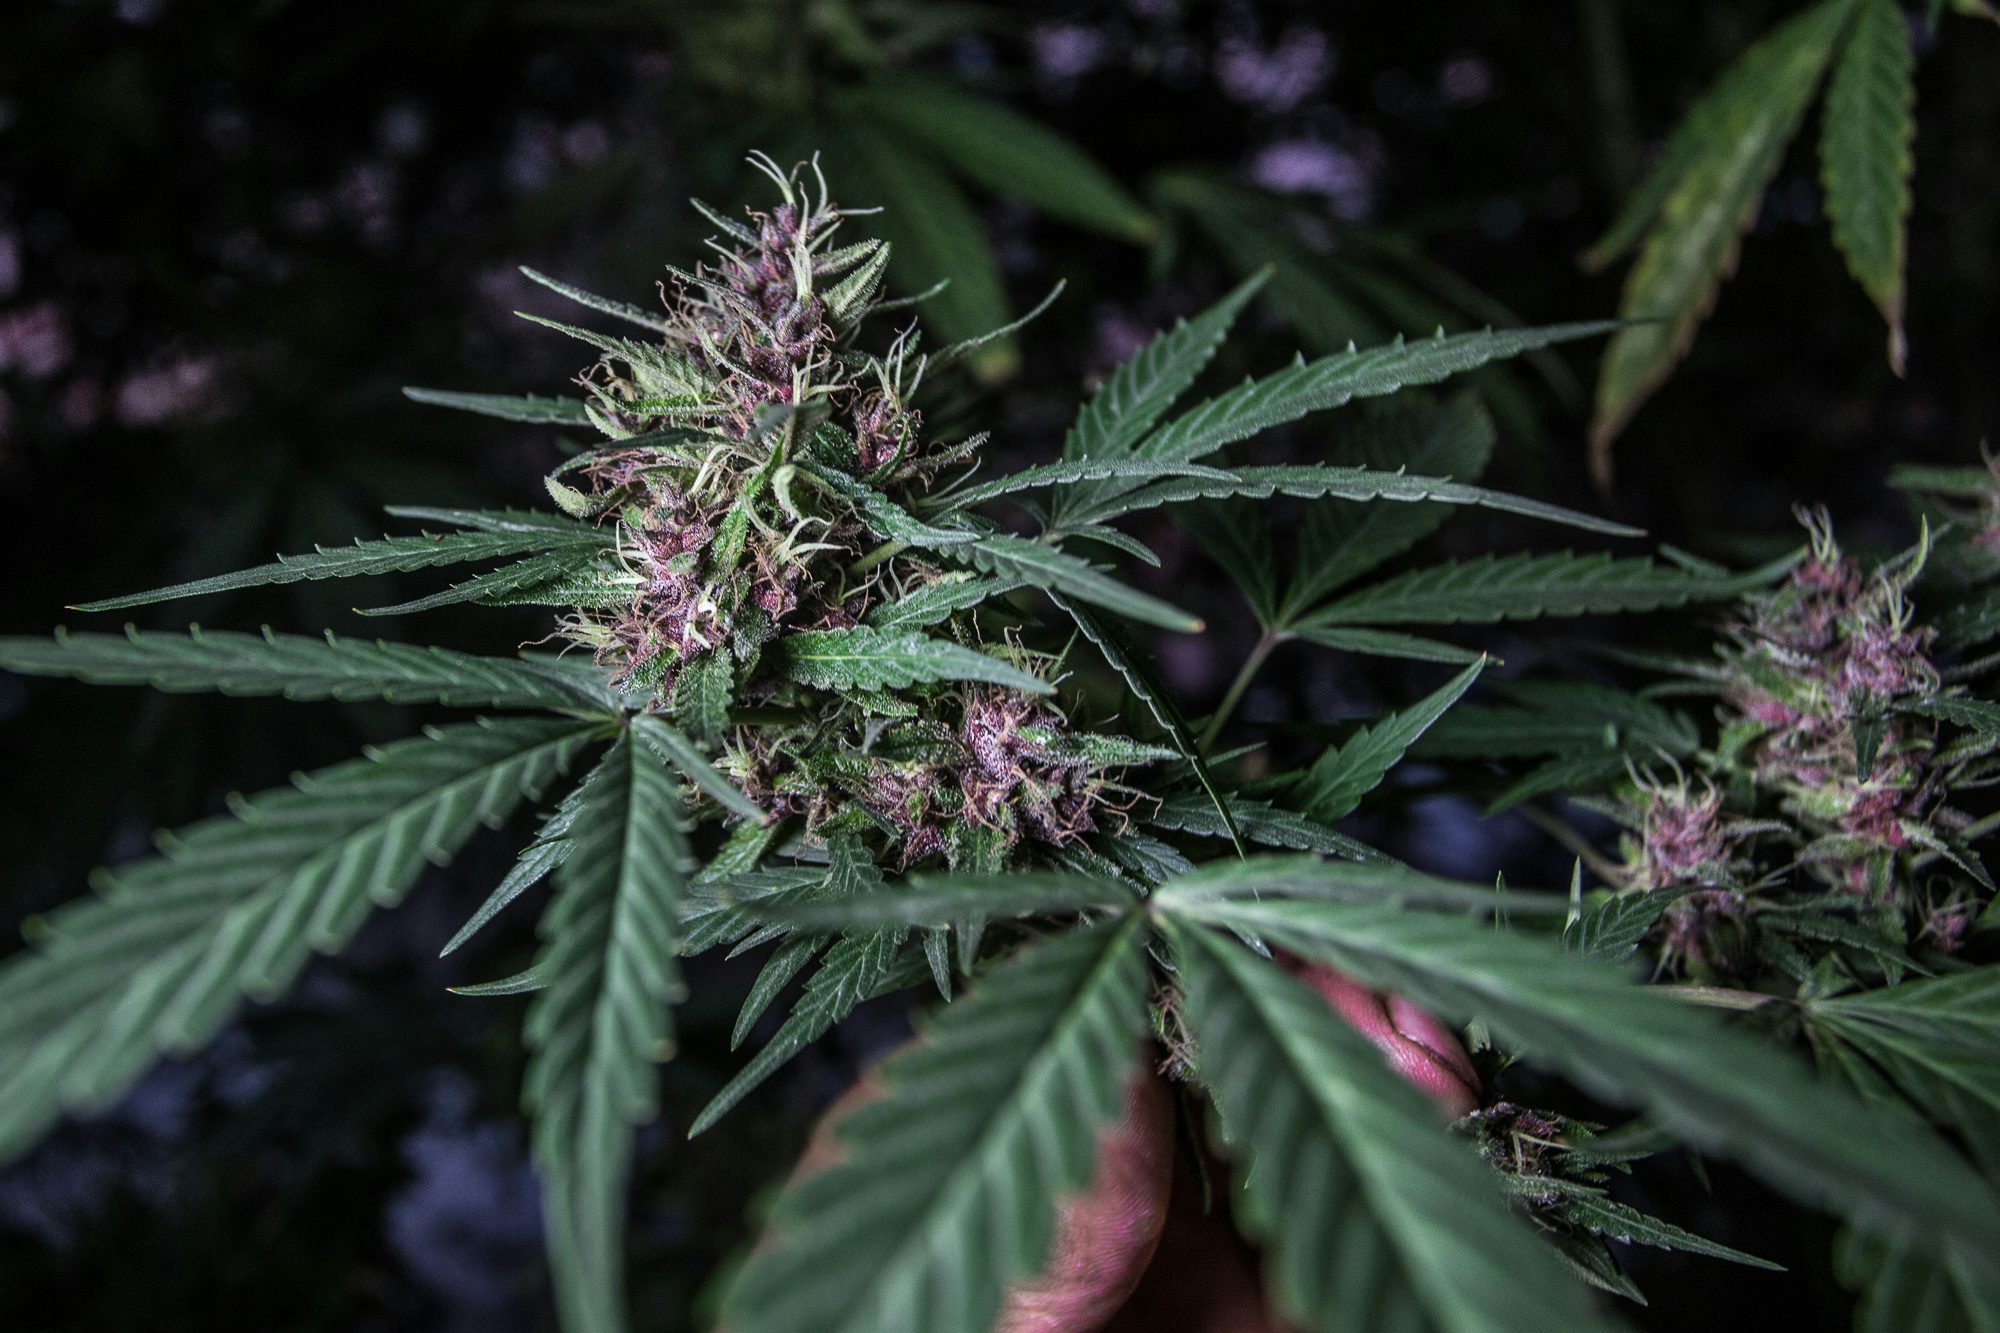 Marijuana Grows Medelli%CC%81n Colombia Photo Essay 4 Maine Pageant Winner Stripped of Title Due to Cannabis Use